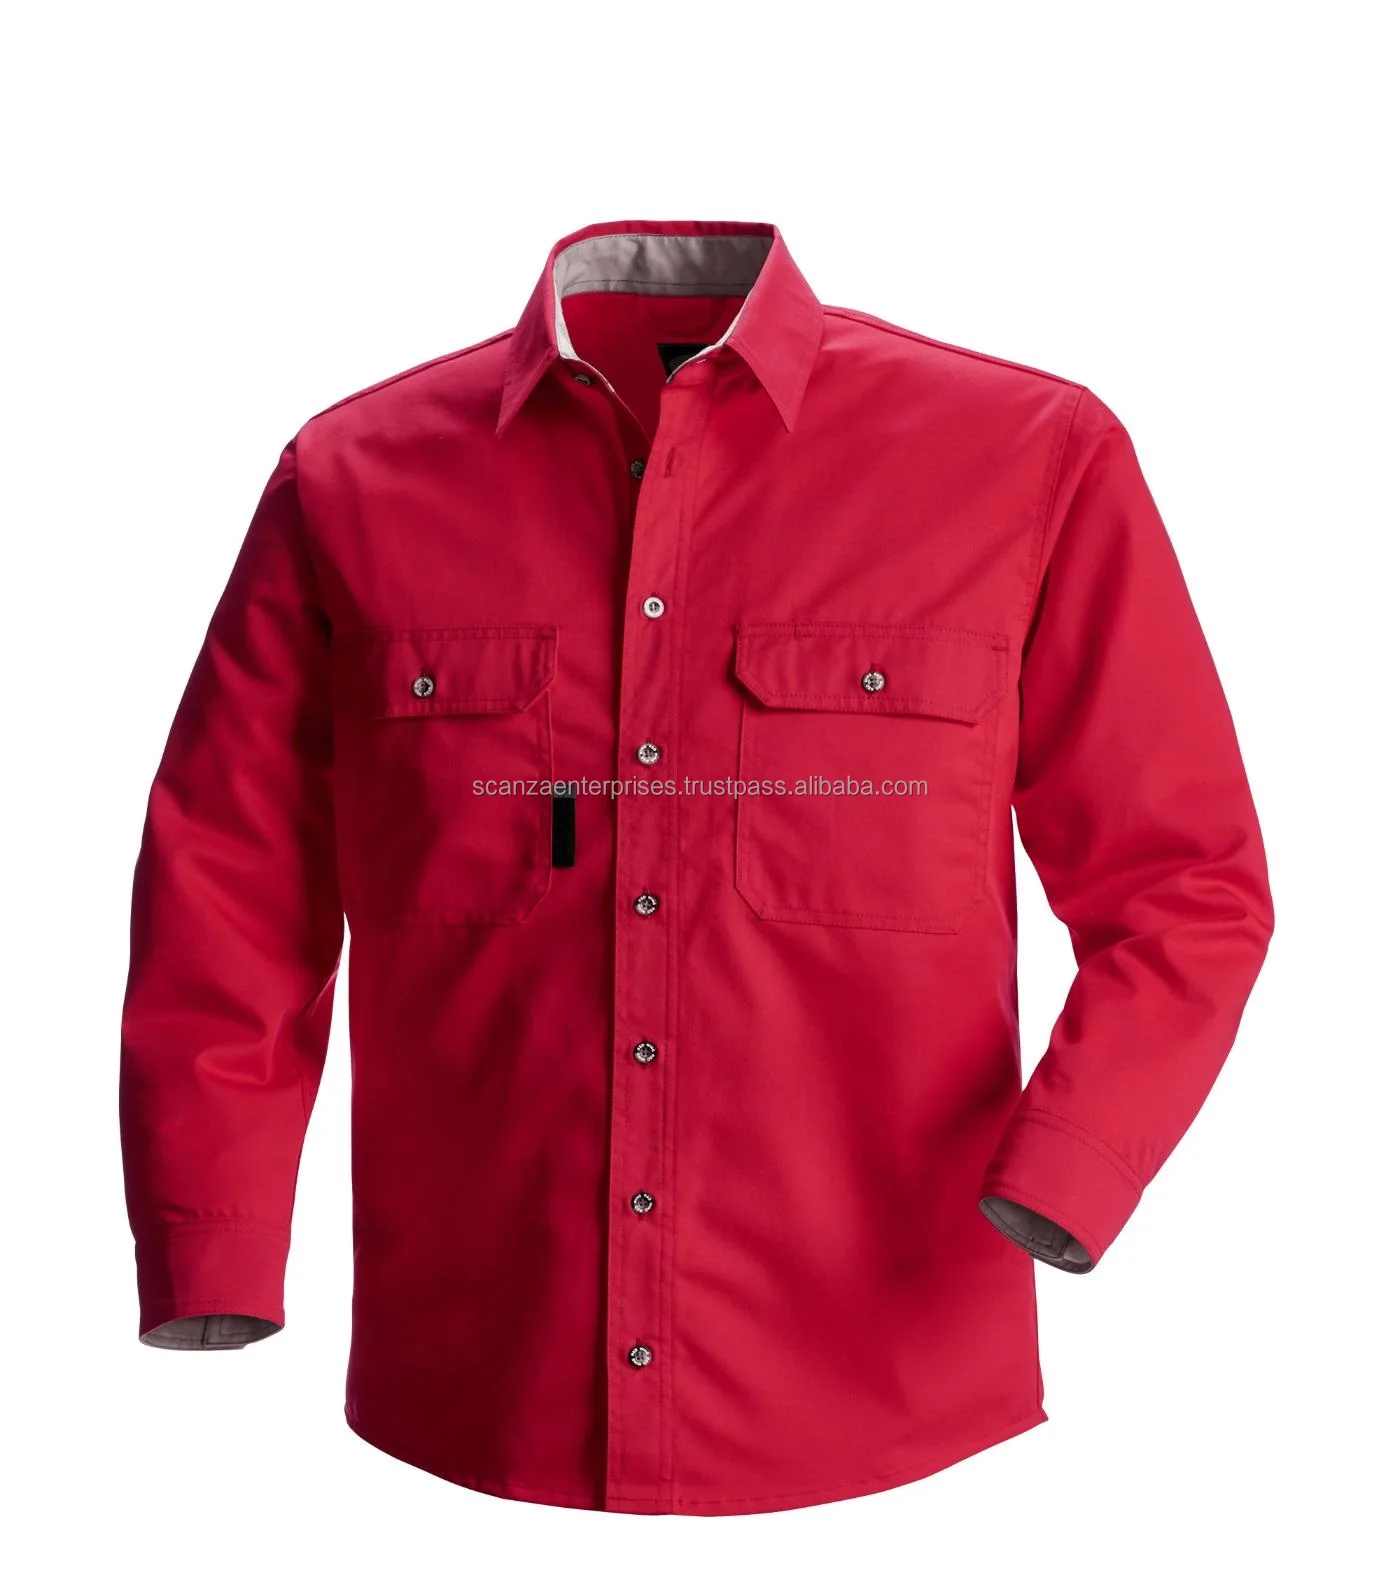 Fire Resistant Shirt Work Overalls Western Fire Resistant Fr Pearl ...